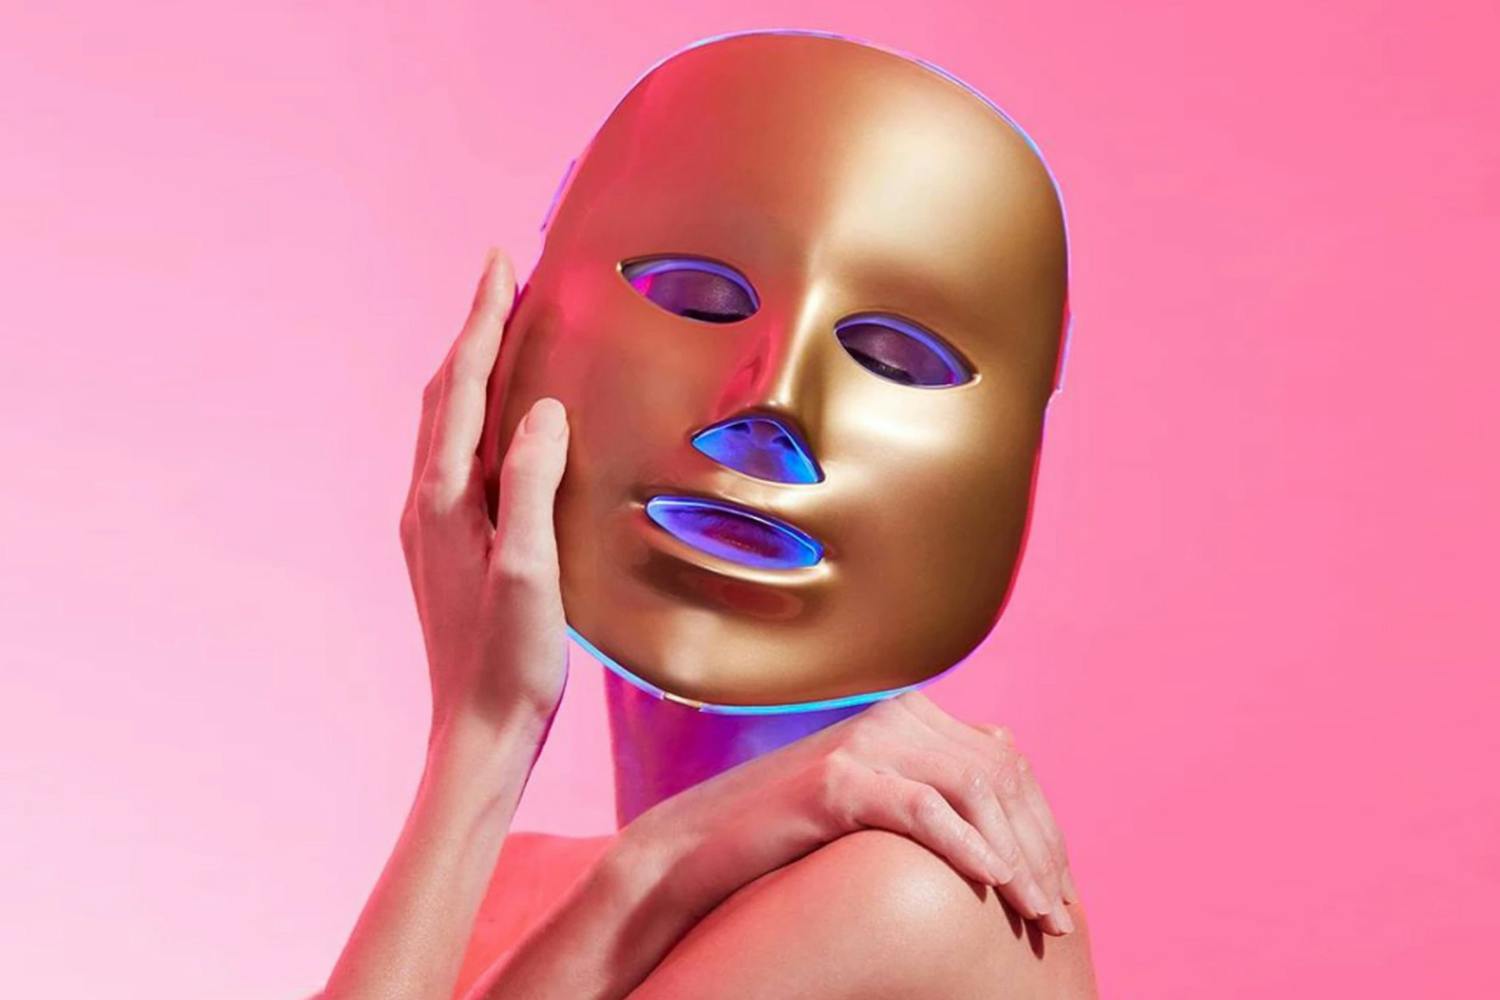 Everything You Need to Know About LED Light Therapy - Skincare Face Mask  Tech